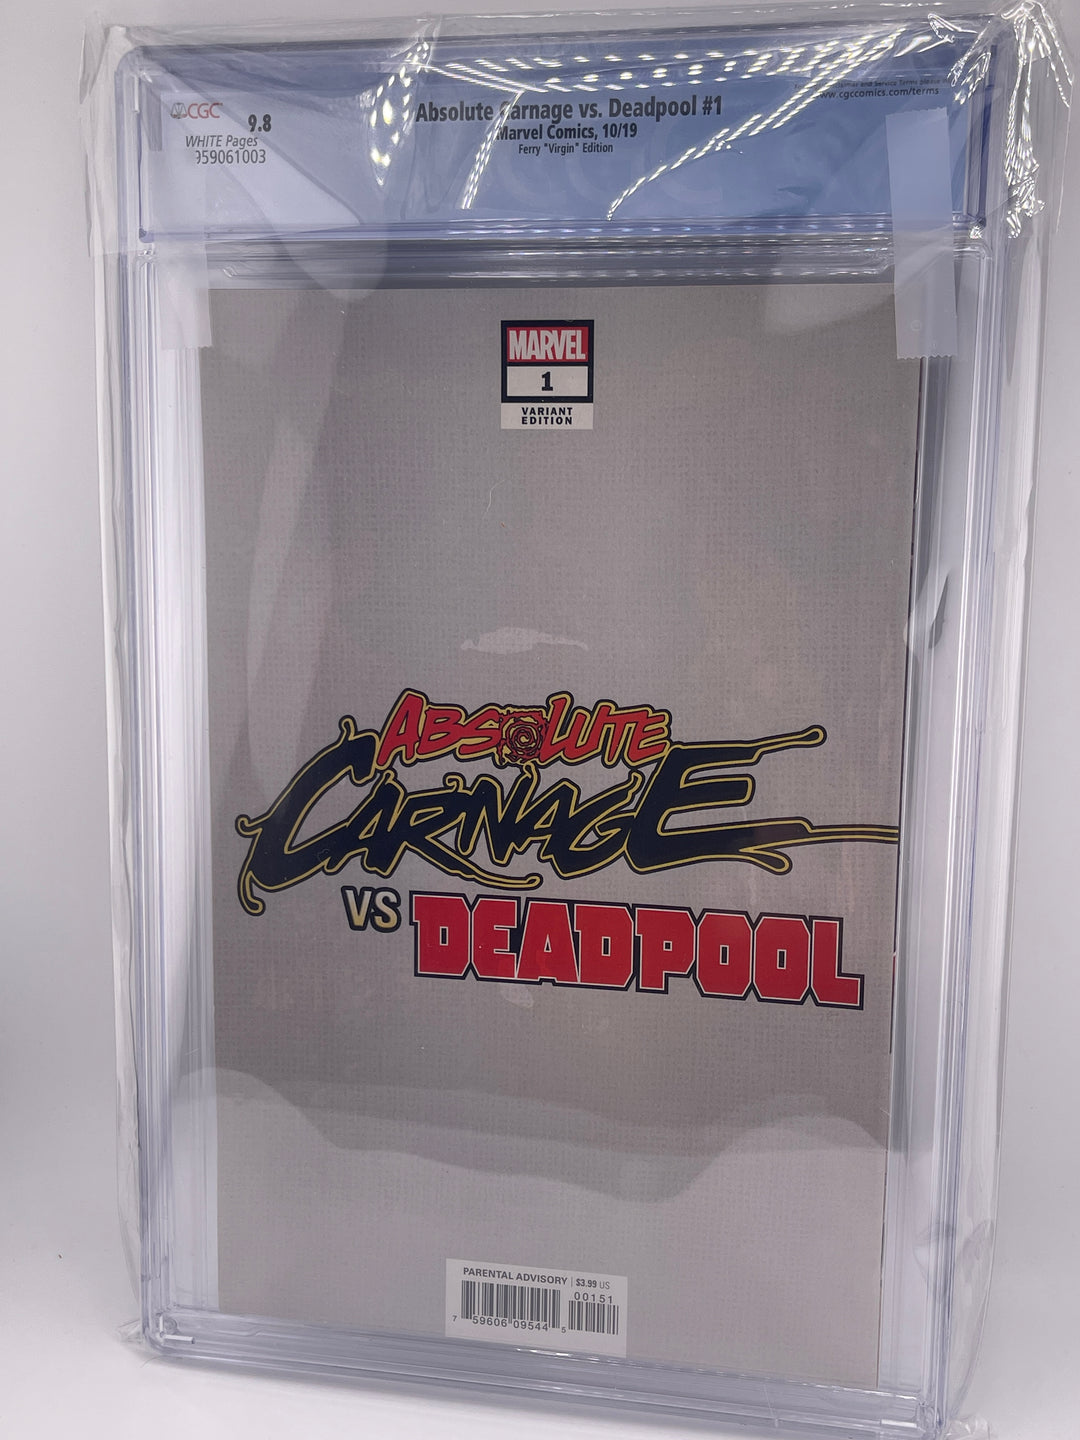 Absolute Carnage vs Deadpool #1-3, all CGC 9.8, all Virgin Exclusives